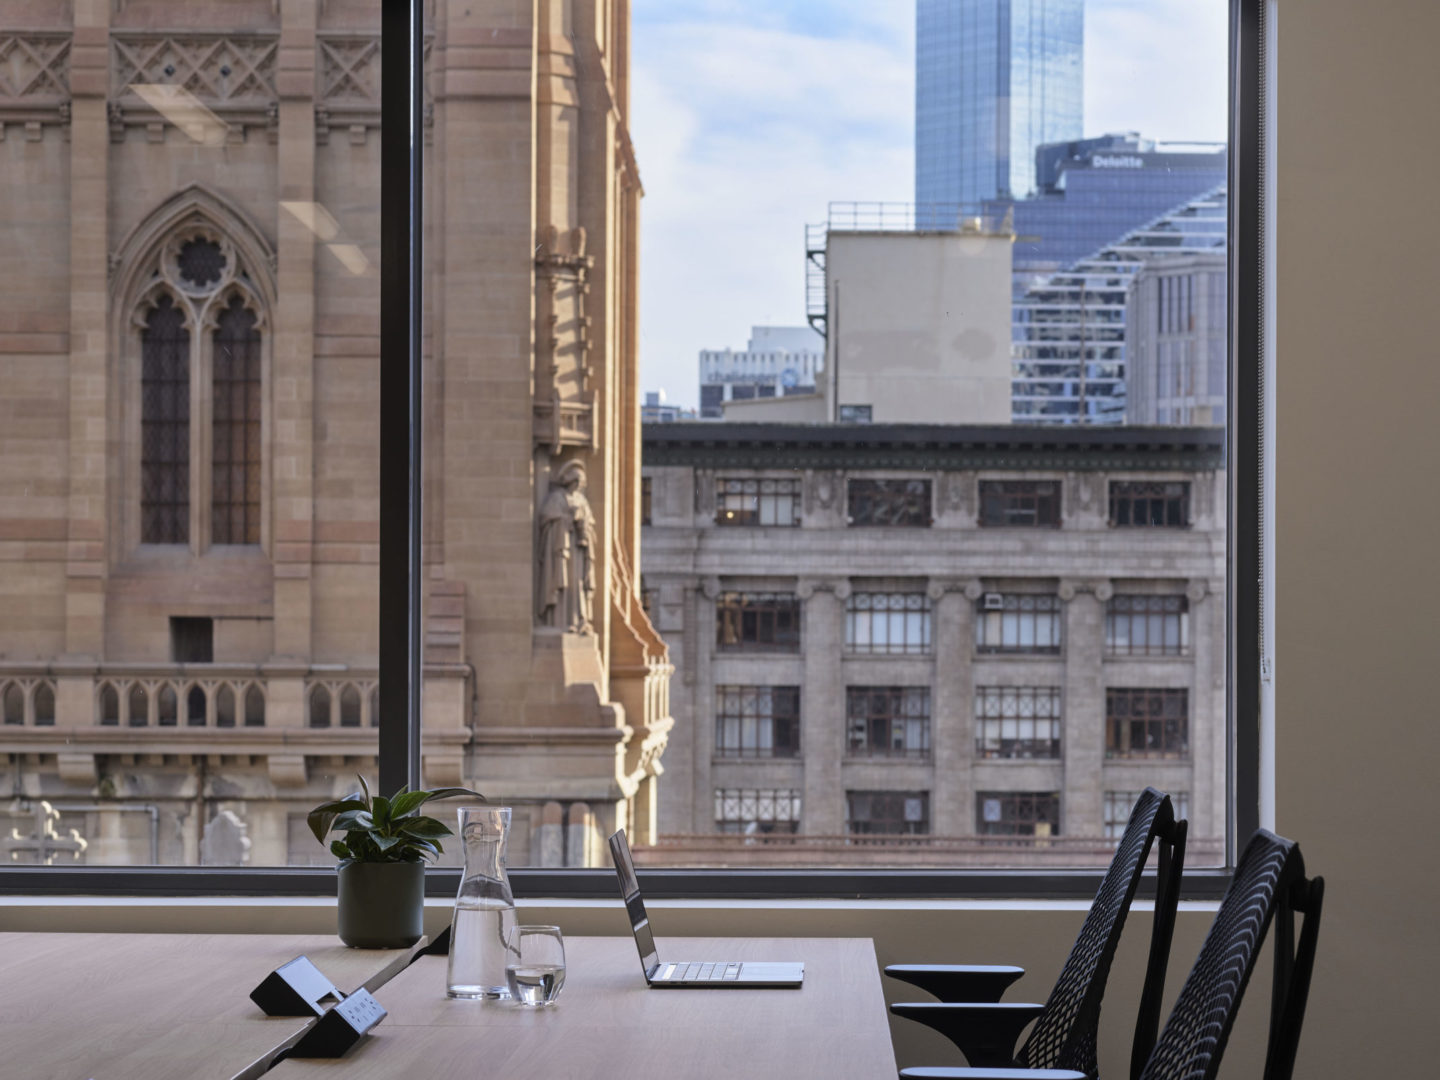  Serviced Office Space in Melbourne Hub Australia provides fully-furnished serviced office spaces in Melbourne for teams of 1 to 100, ready for your team to move in. Discover the flexible monthly terms of our premium serviced office spaces in our eight Melbourne locations.